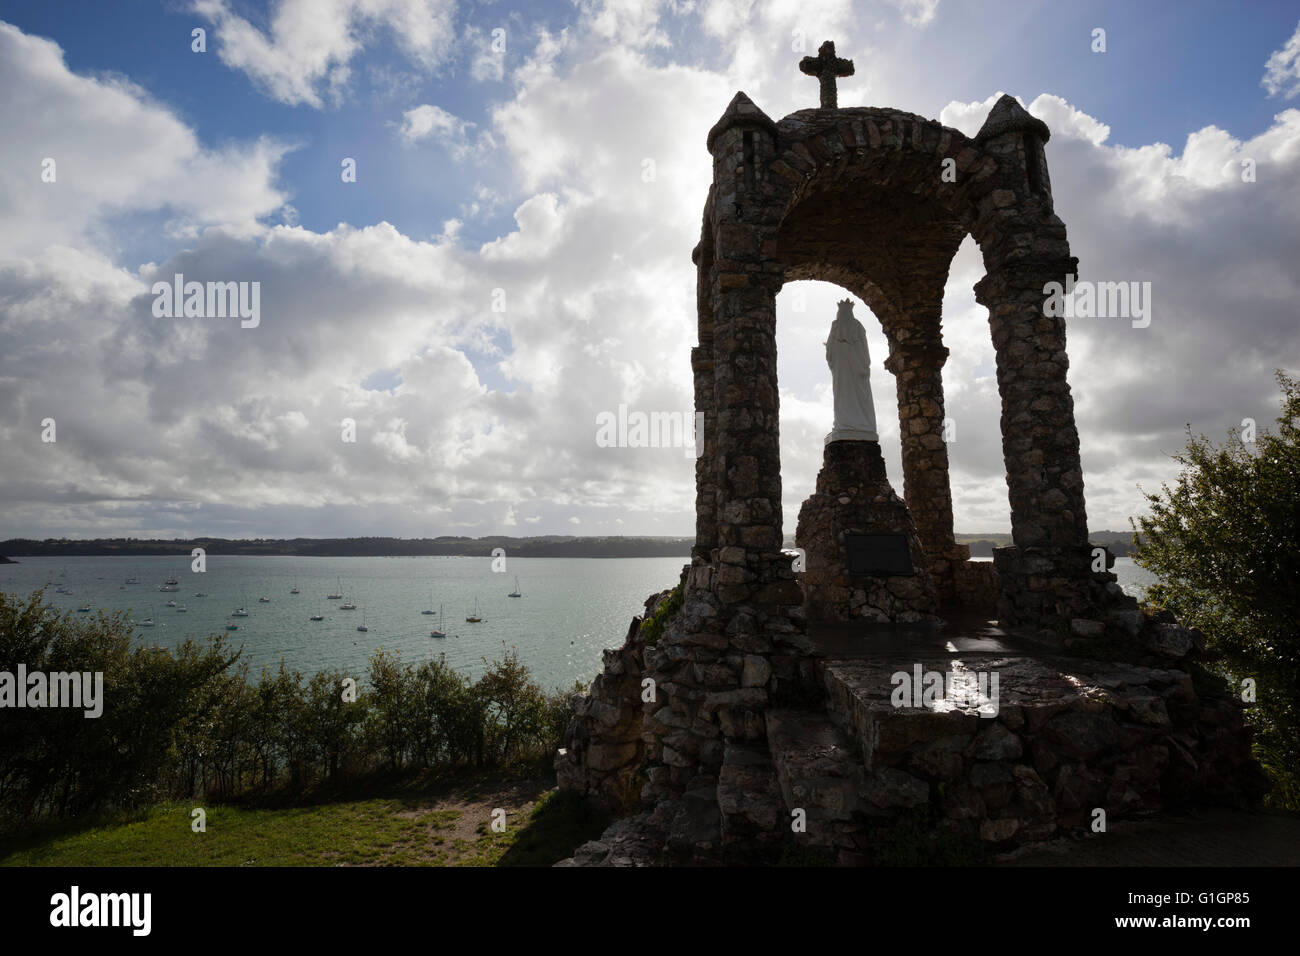 Virgin of Grainfollet statue overlooking River Rance, Saint-Suliac, Brittany, France, Europe Stock Photo